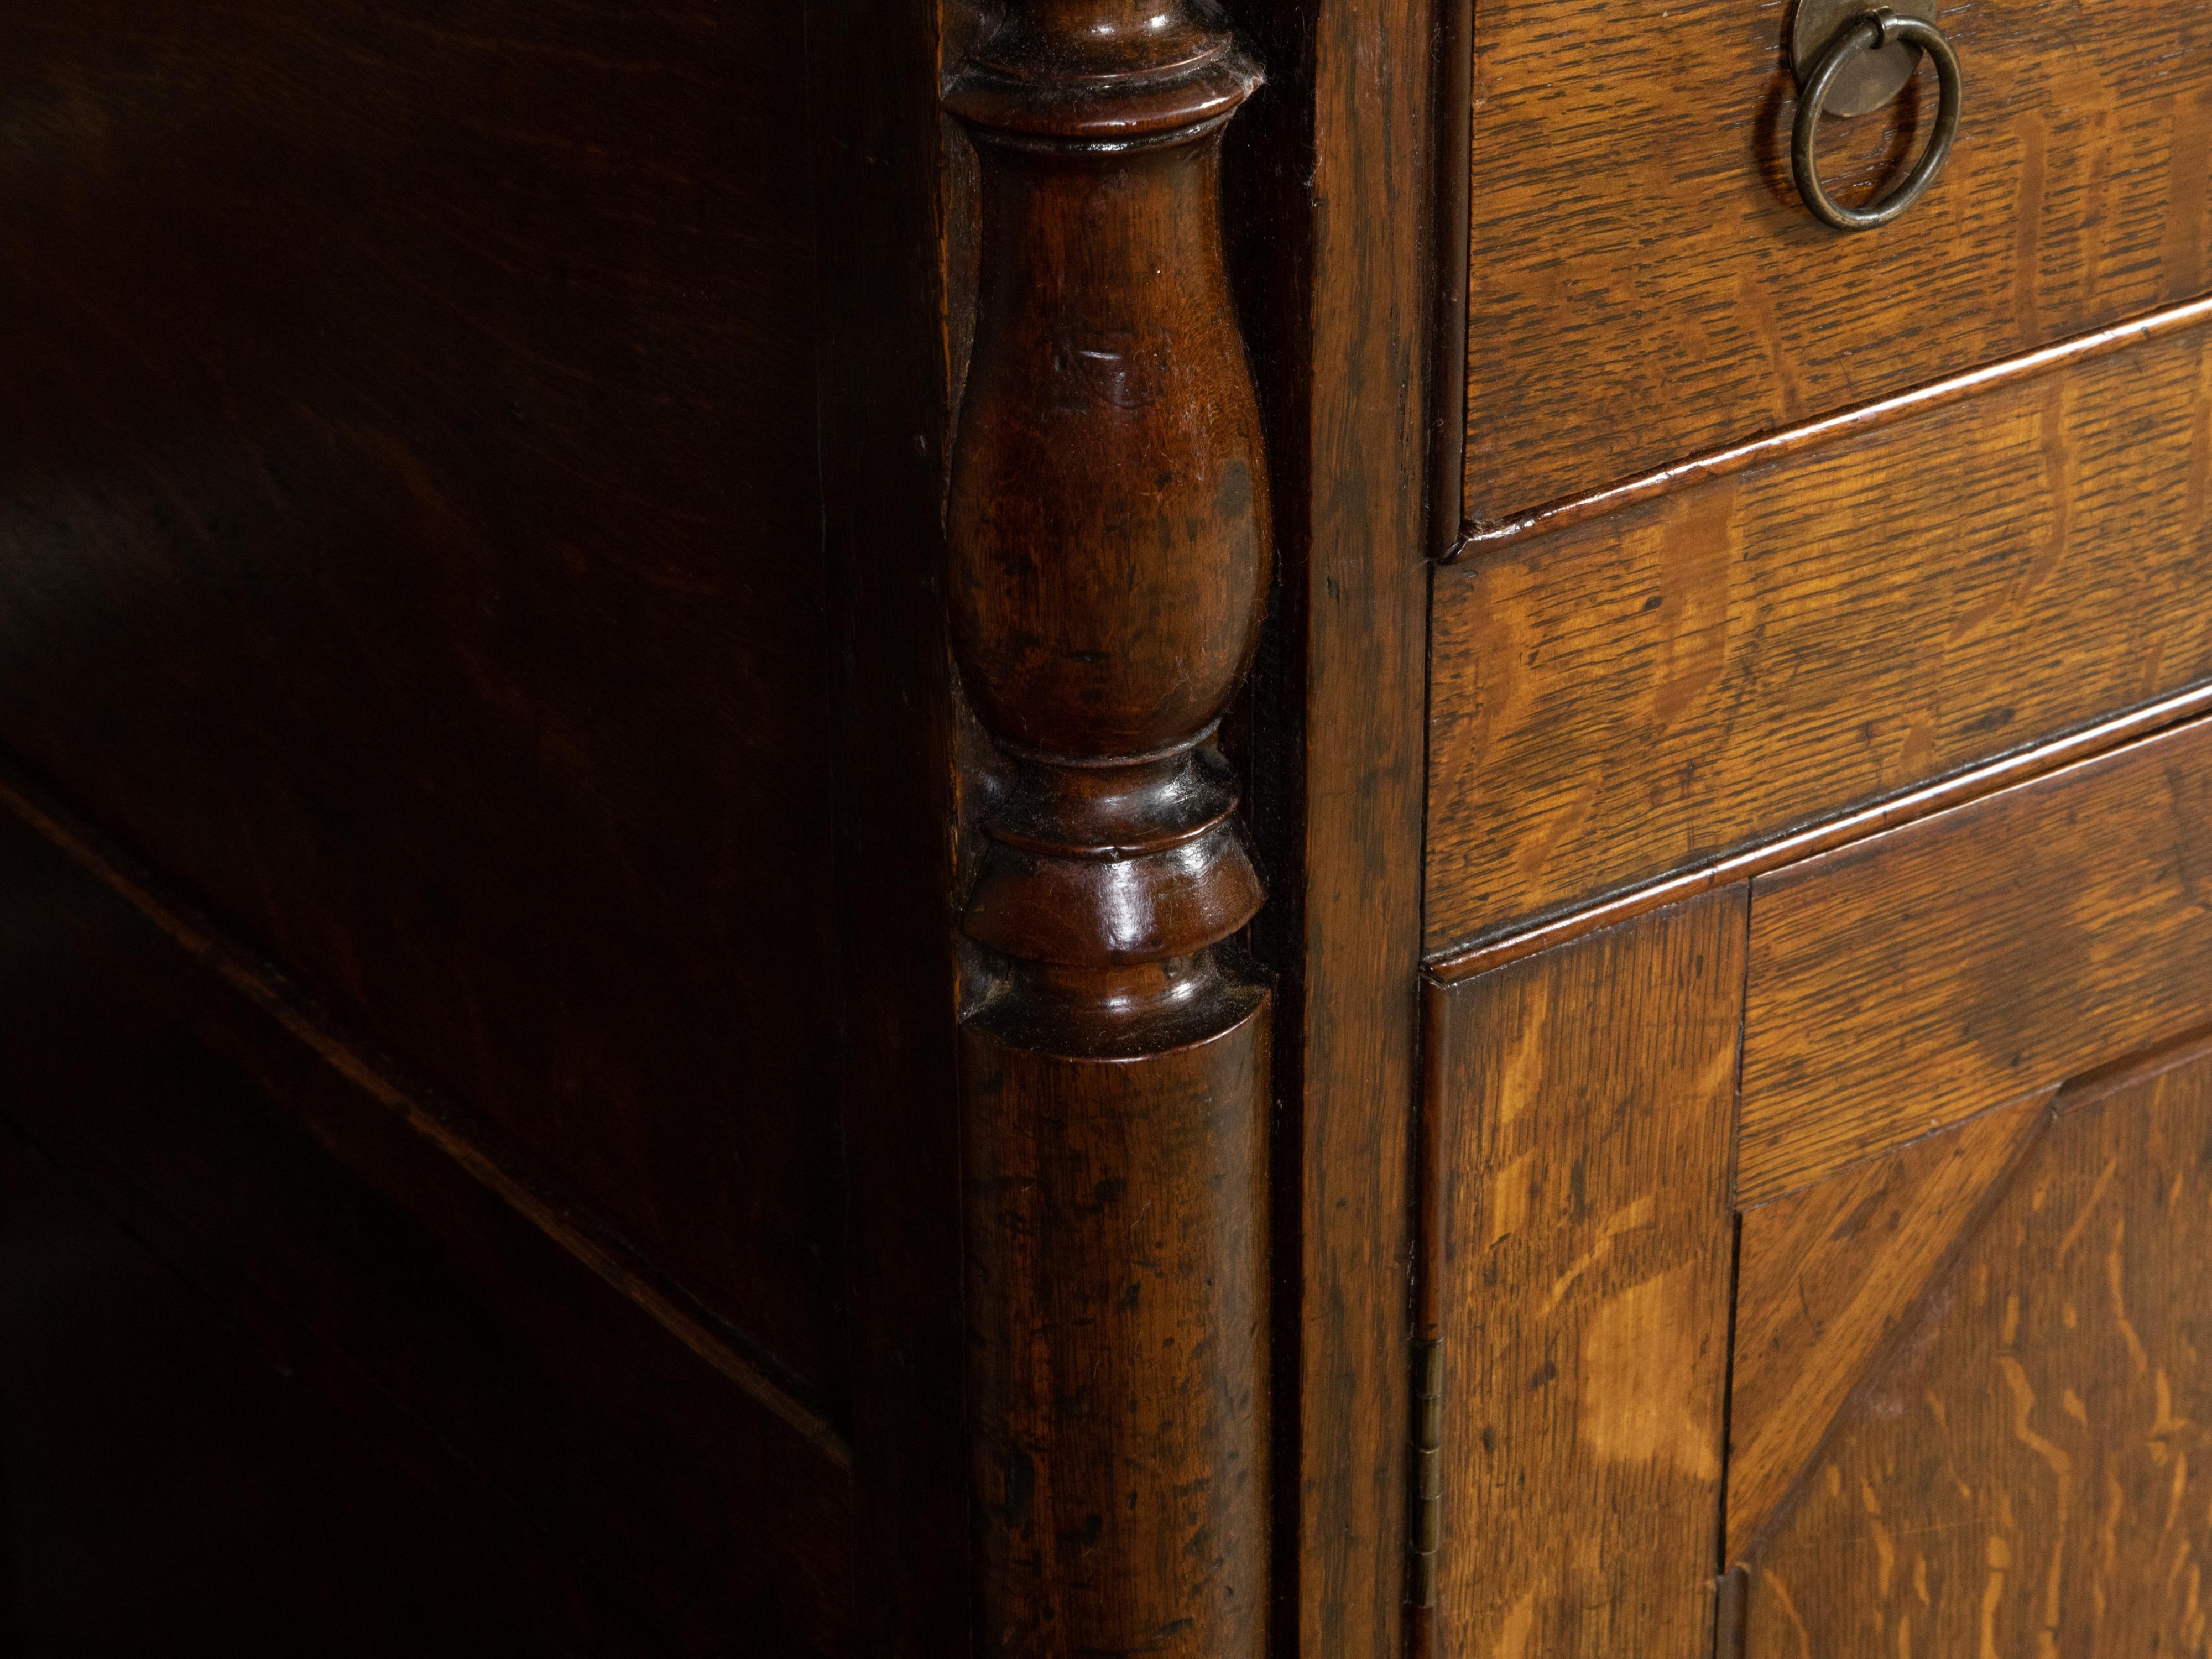 English Georgian Period 18th Century Oak Dresser with Shelves, Drawers and Doors For Sale 7